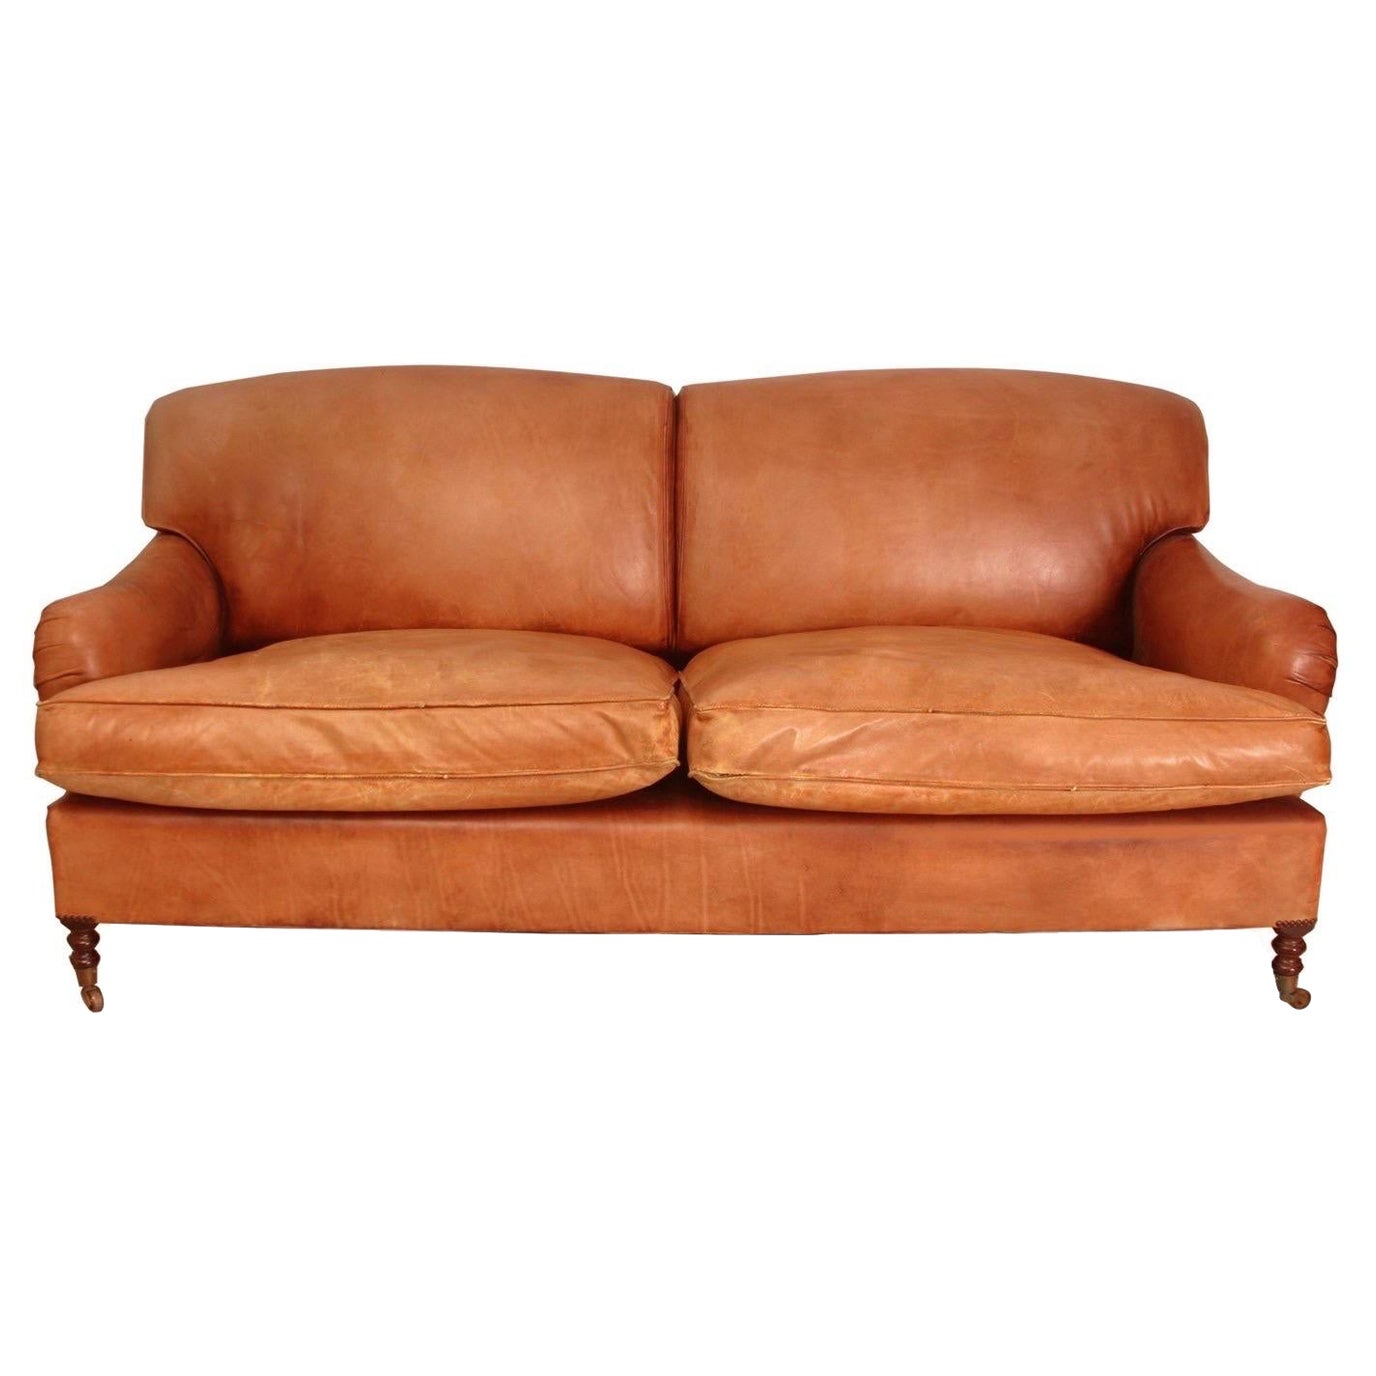 George Smith Cognac Leather Loveseat For Sale